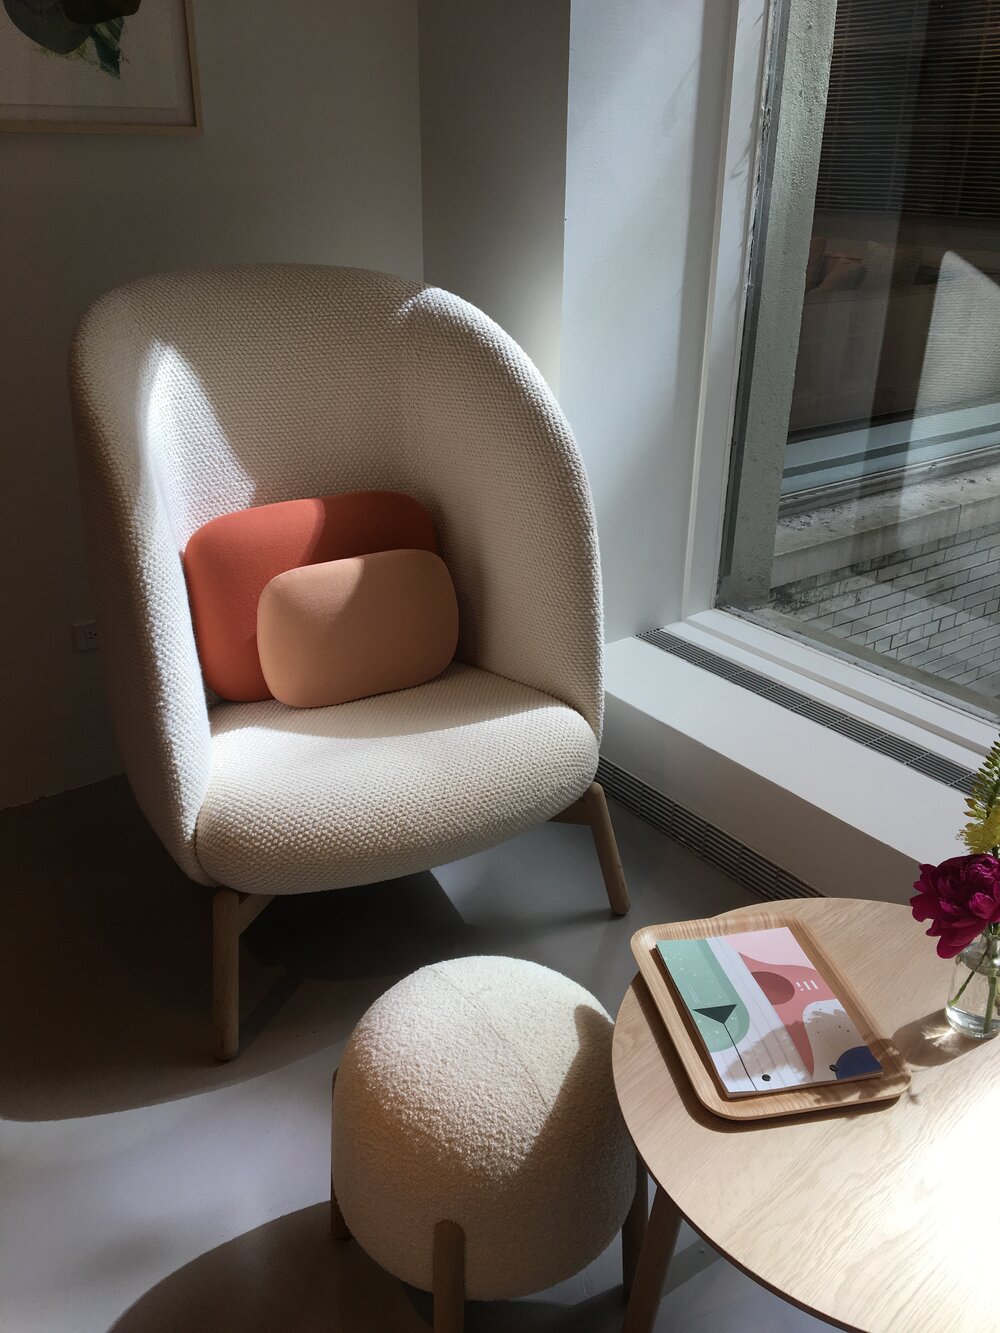  The  Hightower Nest Easy Chair  repeats rounded forms ad nauseum and we love it. Who wouldn’t love taking a call or drinking a cup of coffee nestled in this vision of coziness? 